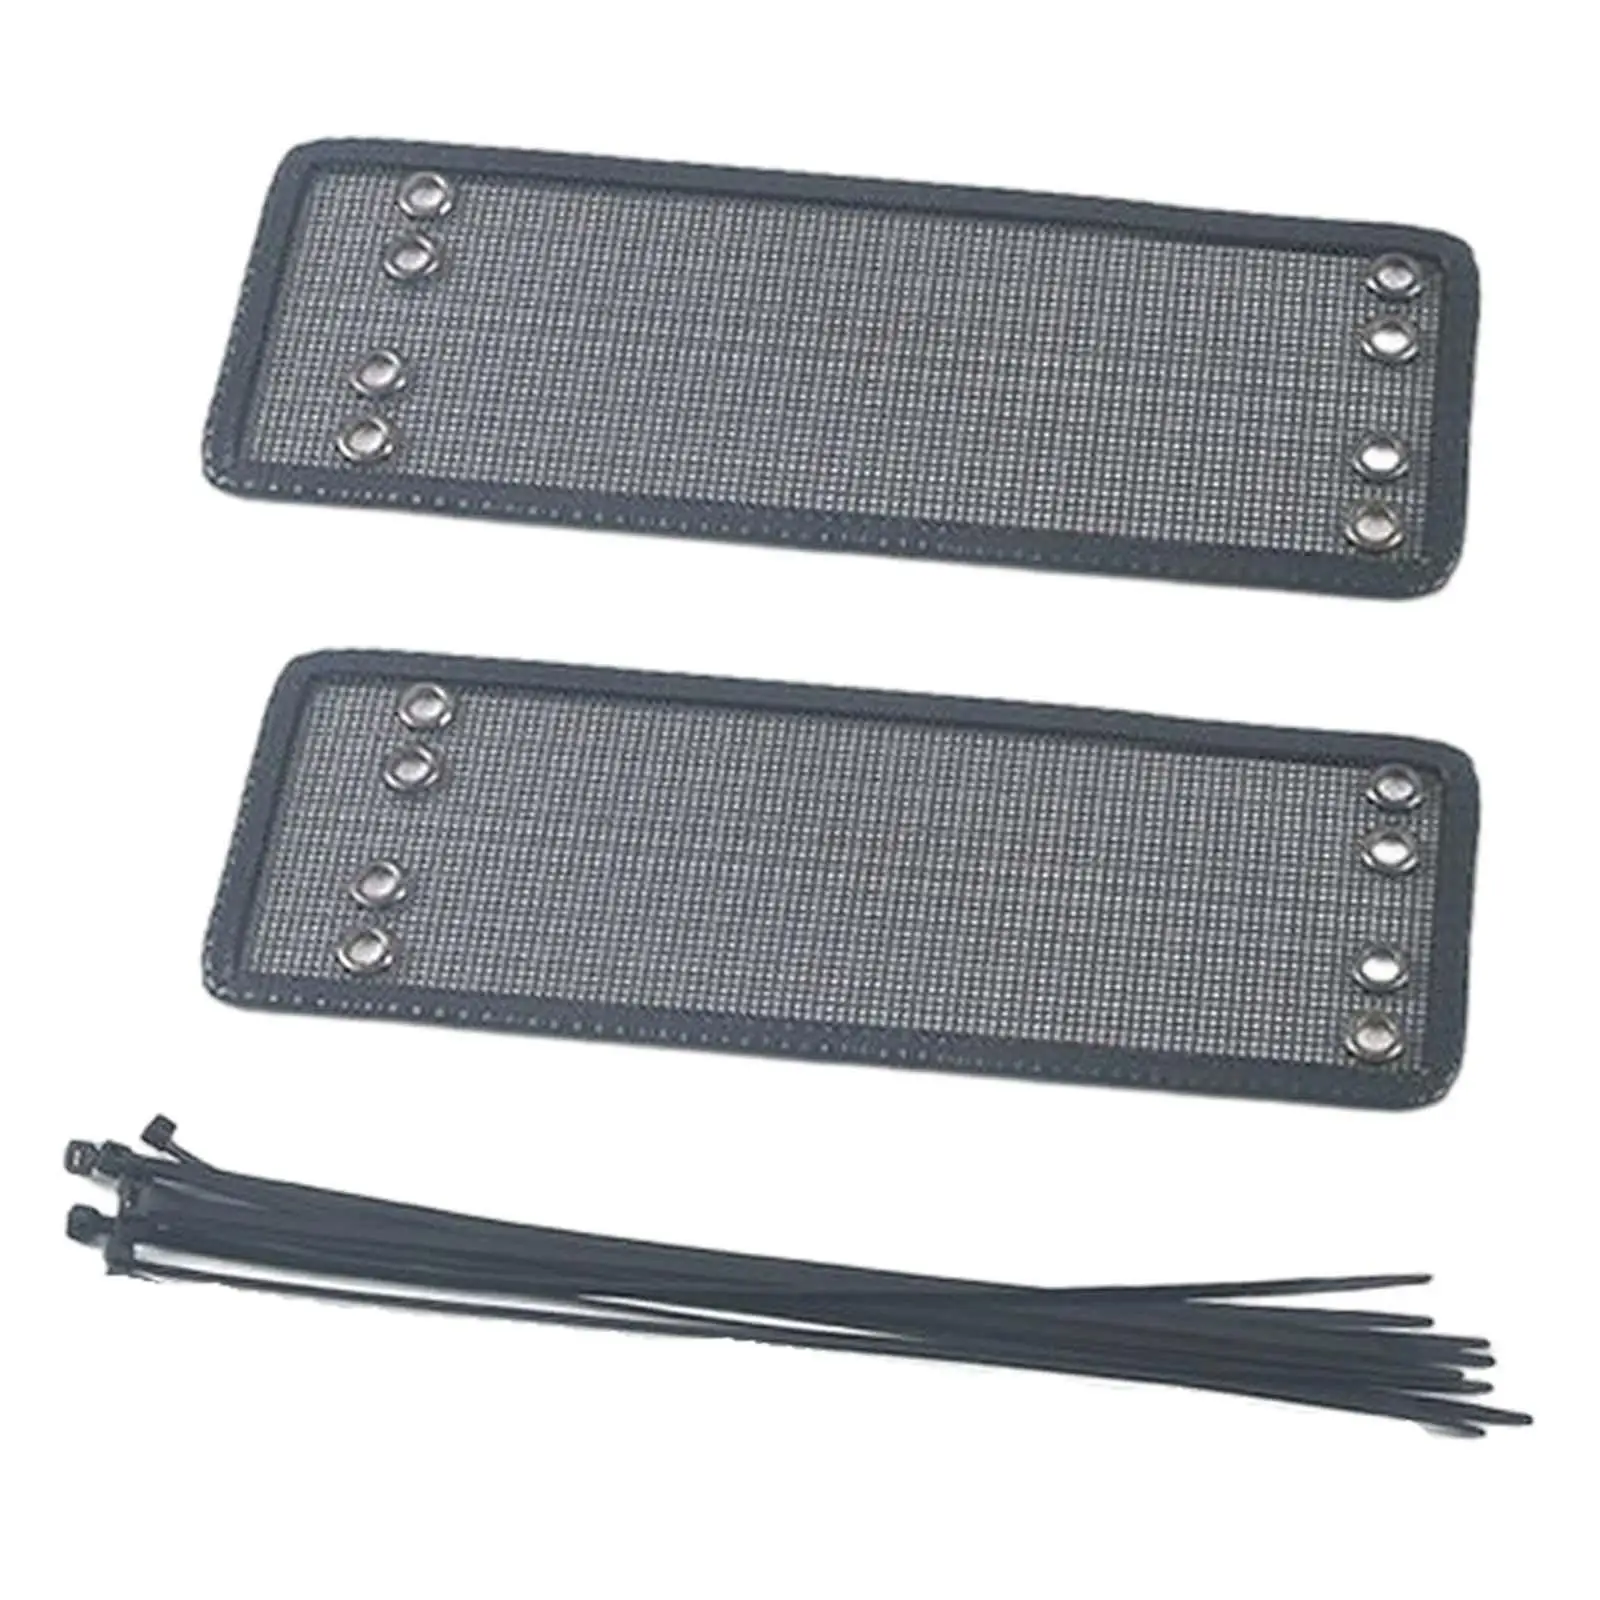 Front Grille Insert Net Car Middle Screening Mesh for Byd Atto 3 21 Accessory Premium Replacement Spare Parts